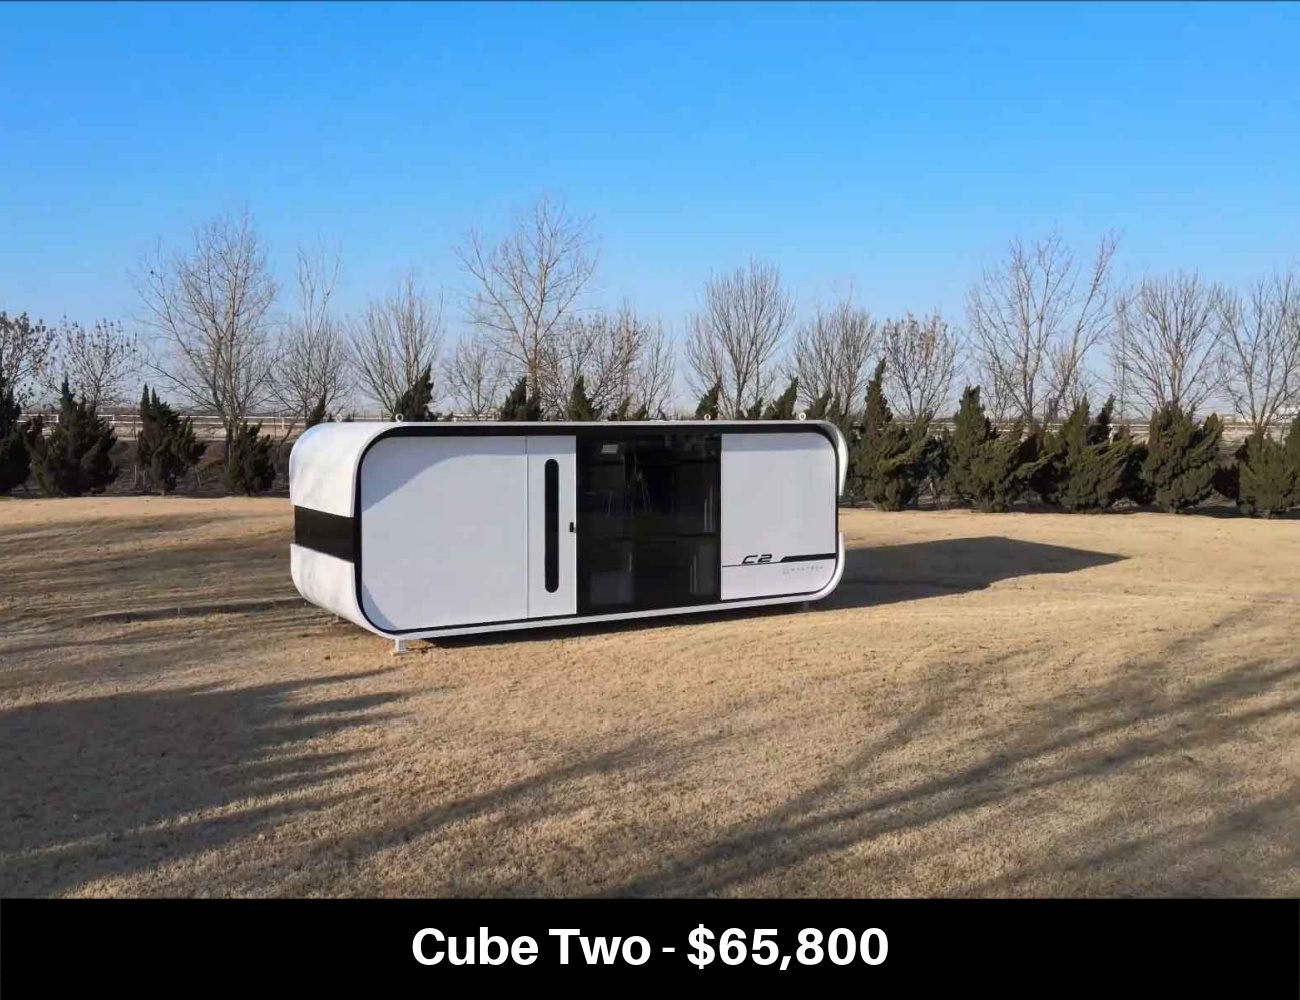 Cube Two - $65,800